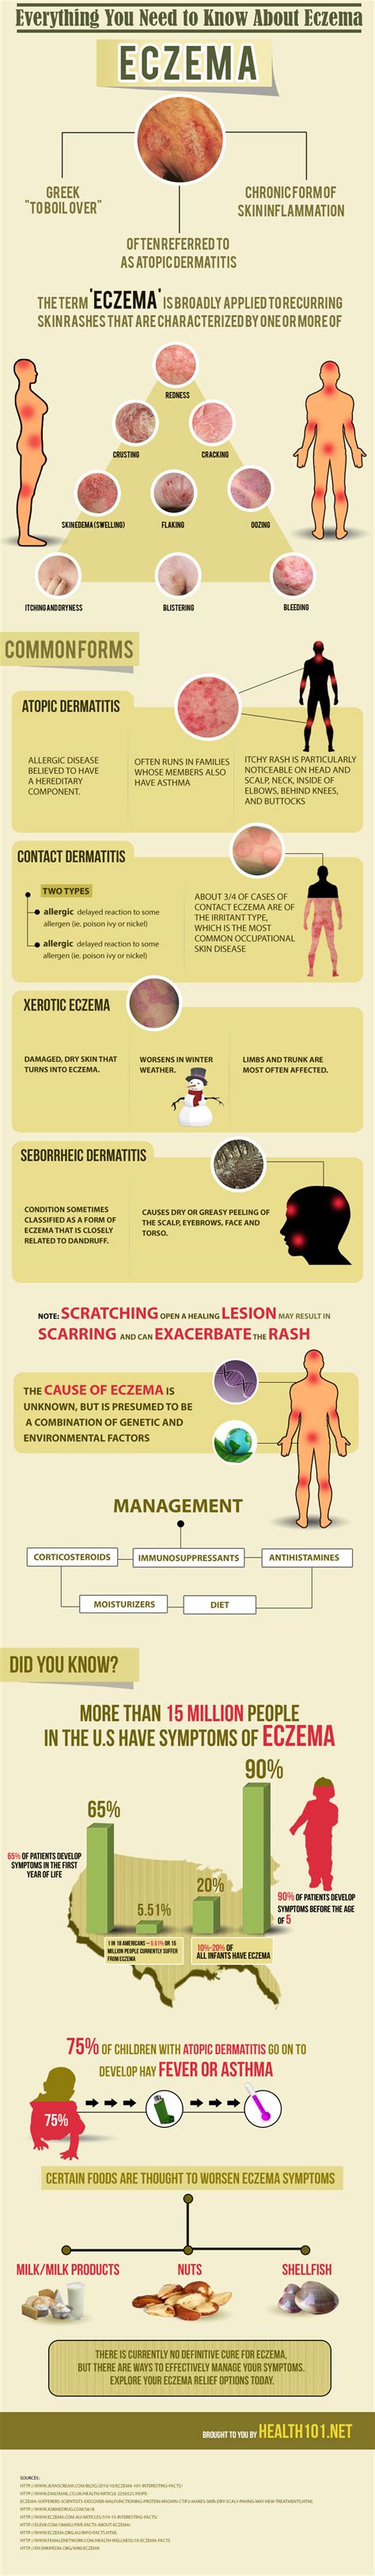 Everything You Need To Know About Eczema Infographic